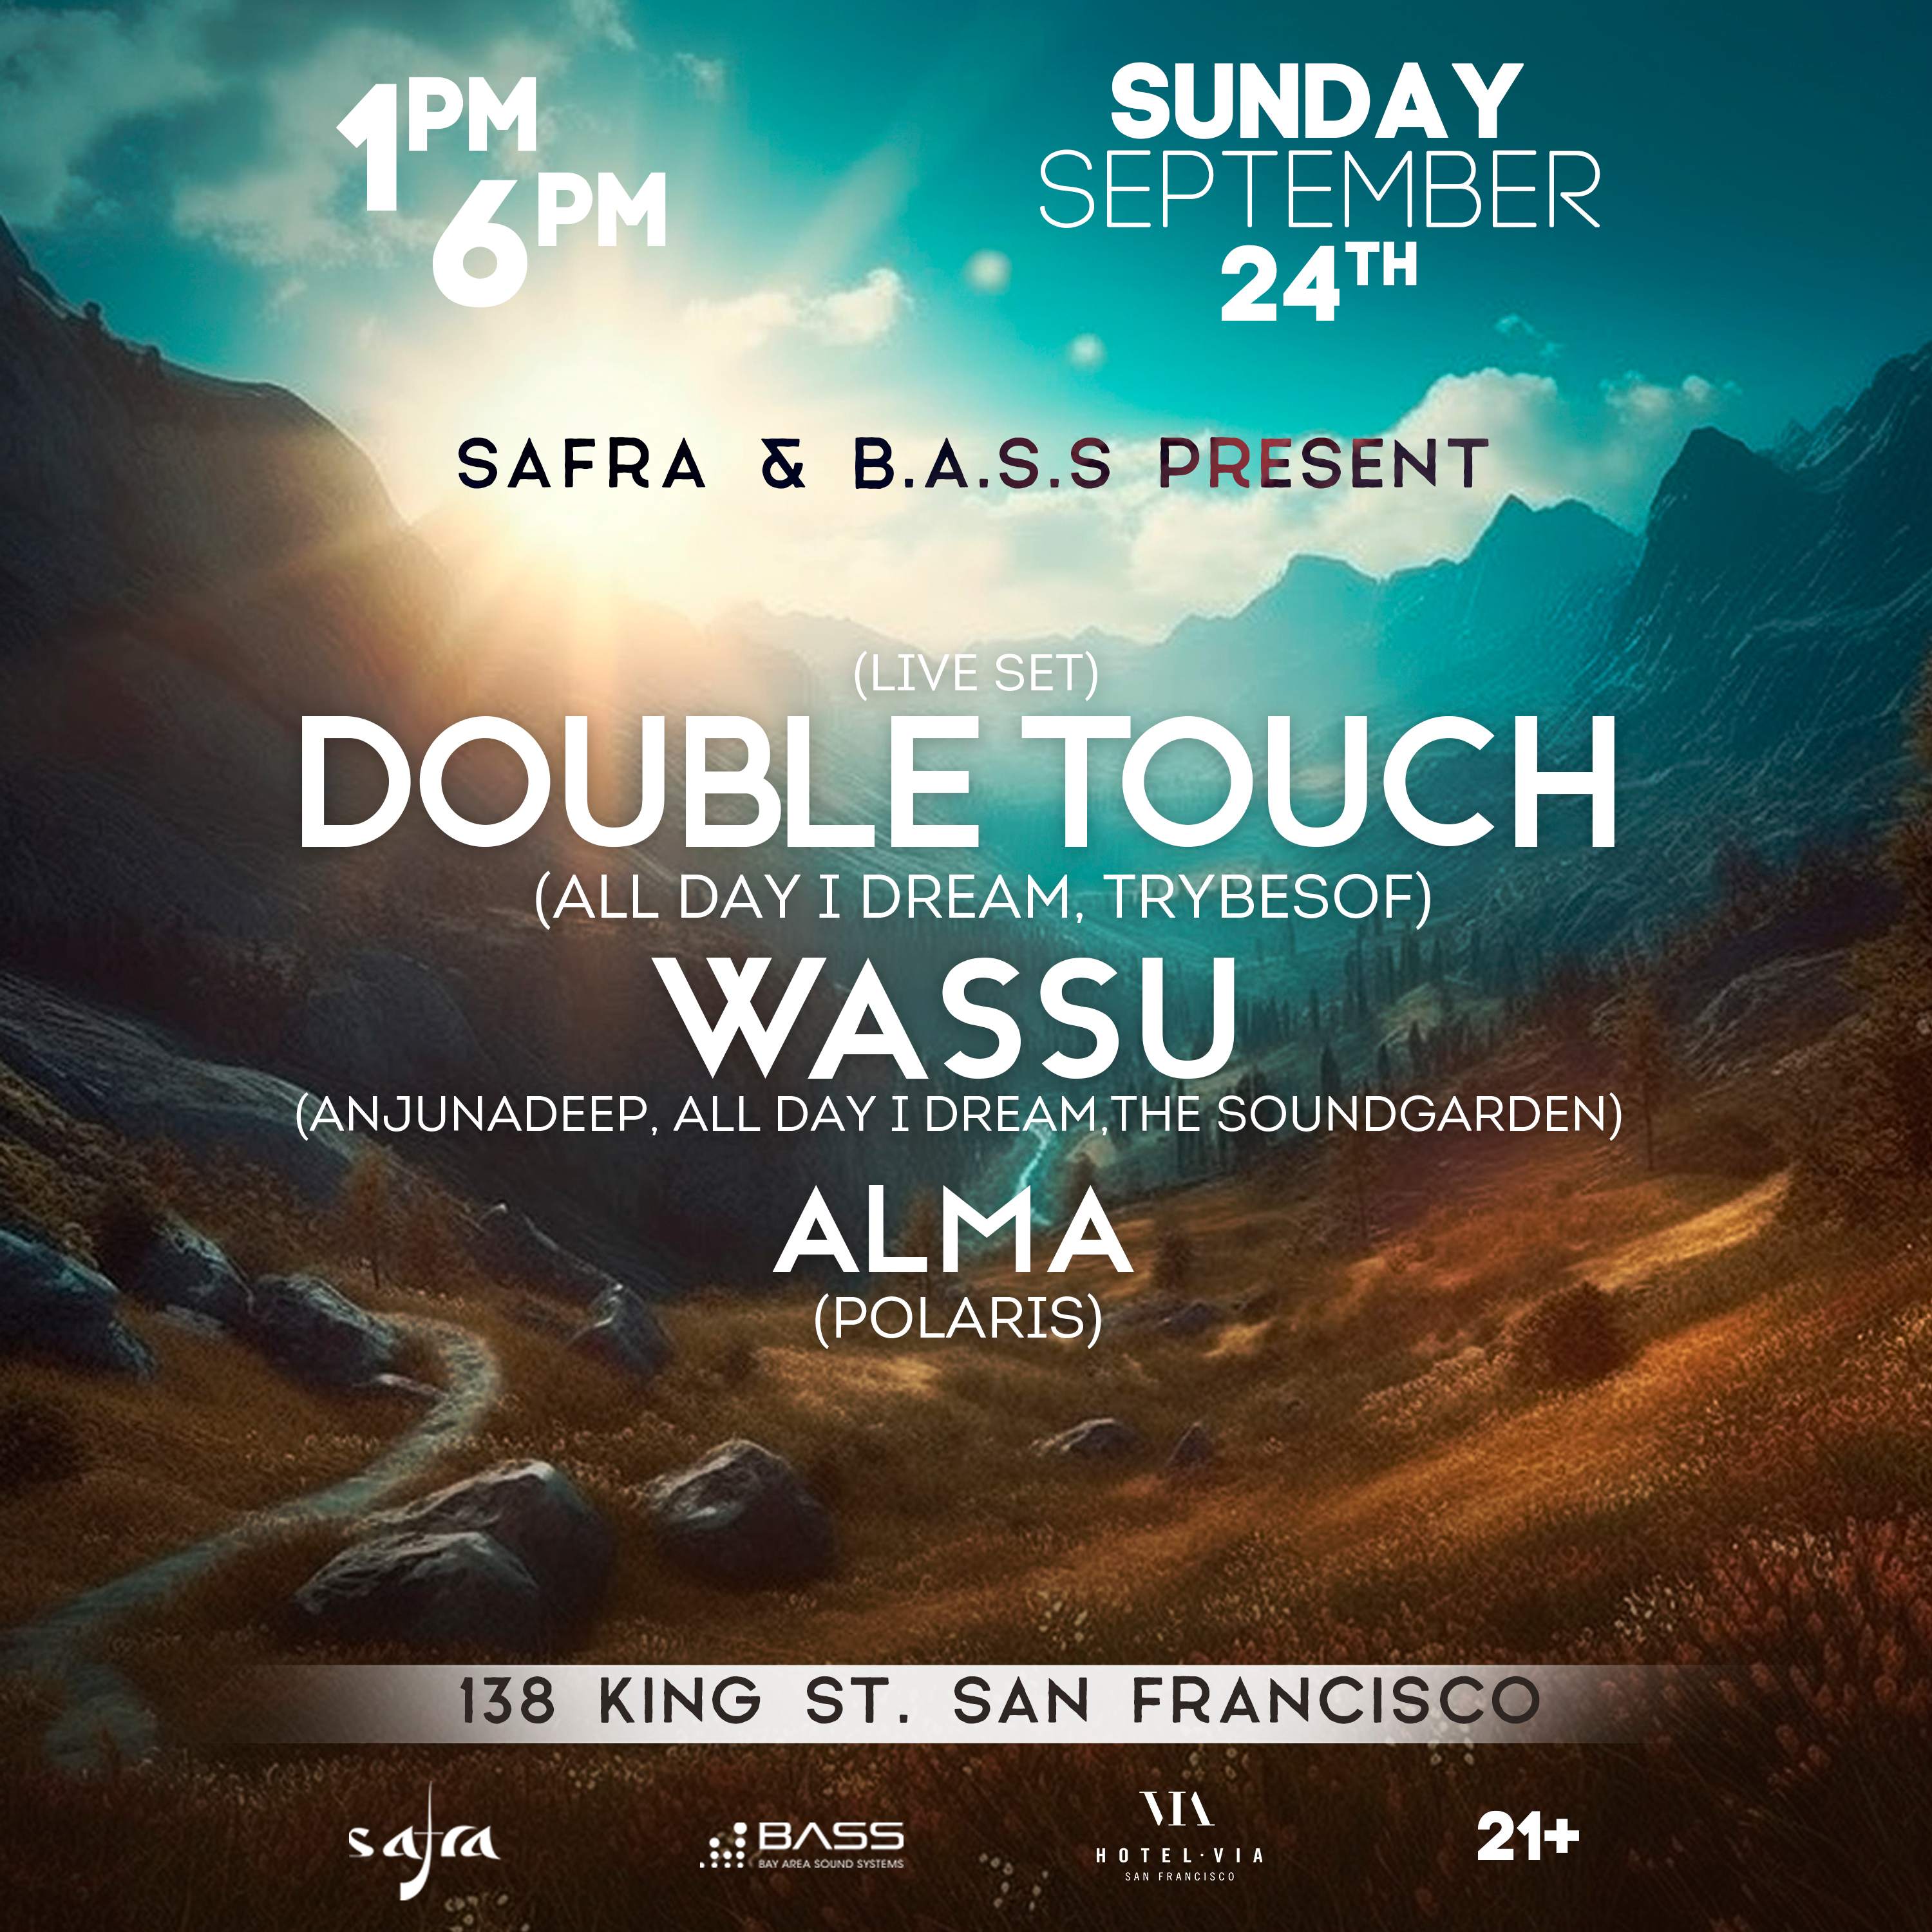 Double Touch(live) & Wassu at the Via Hotel Rooftop - フライヤー表